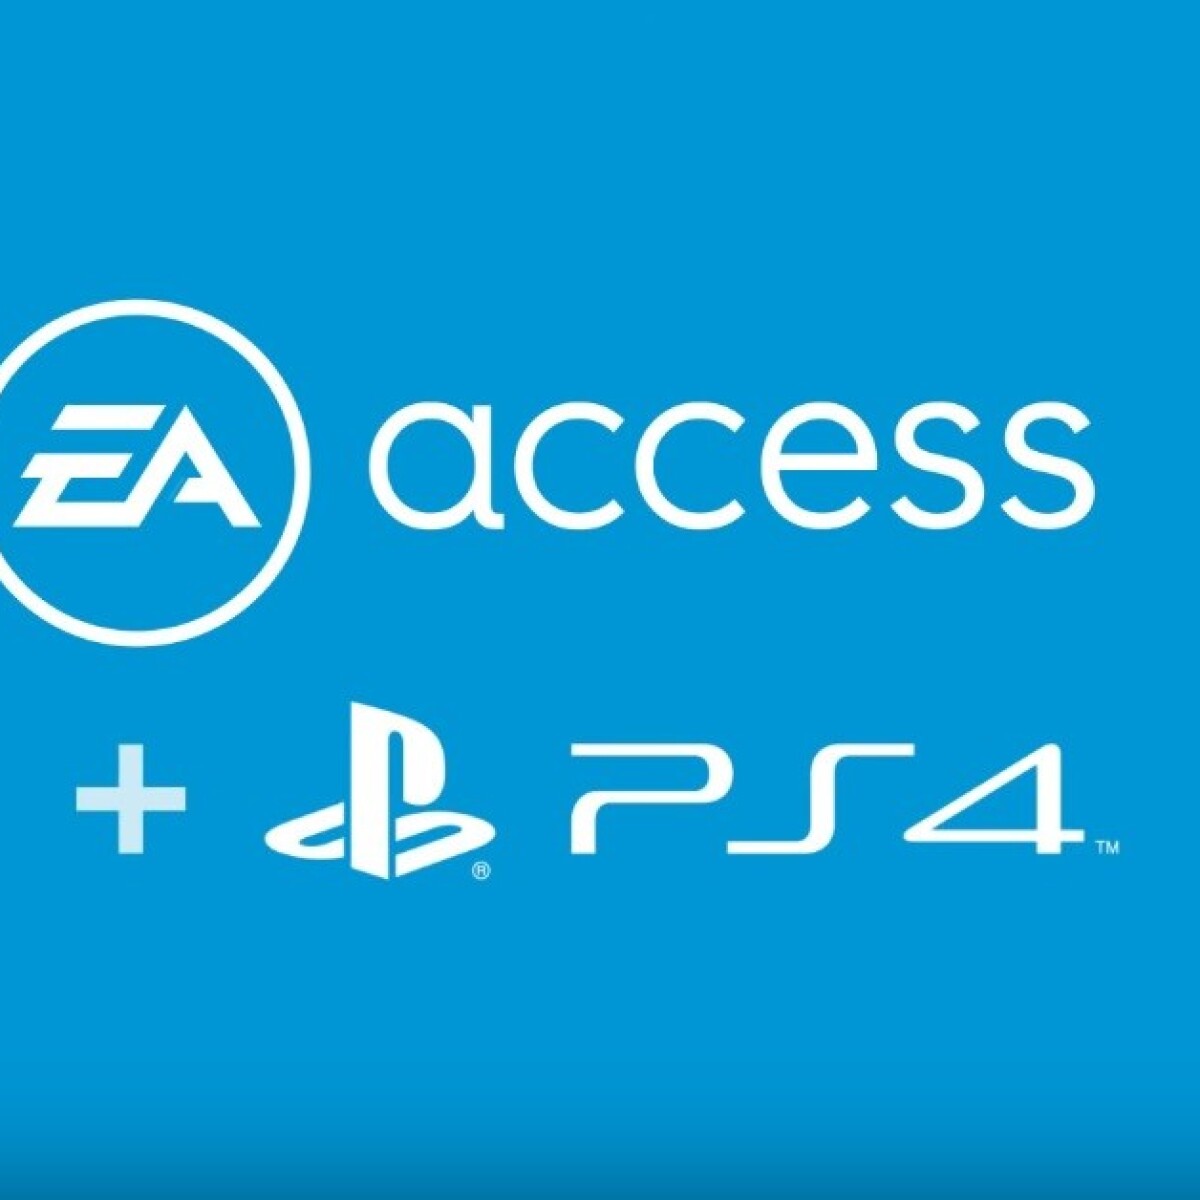 Ea access. PLAYSTATION accessibility.